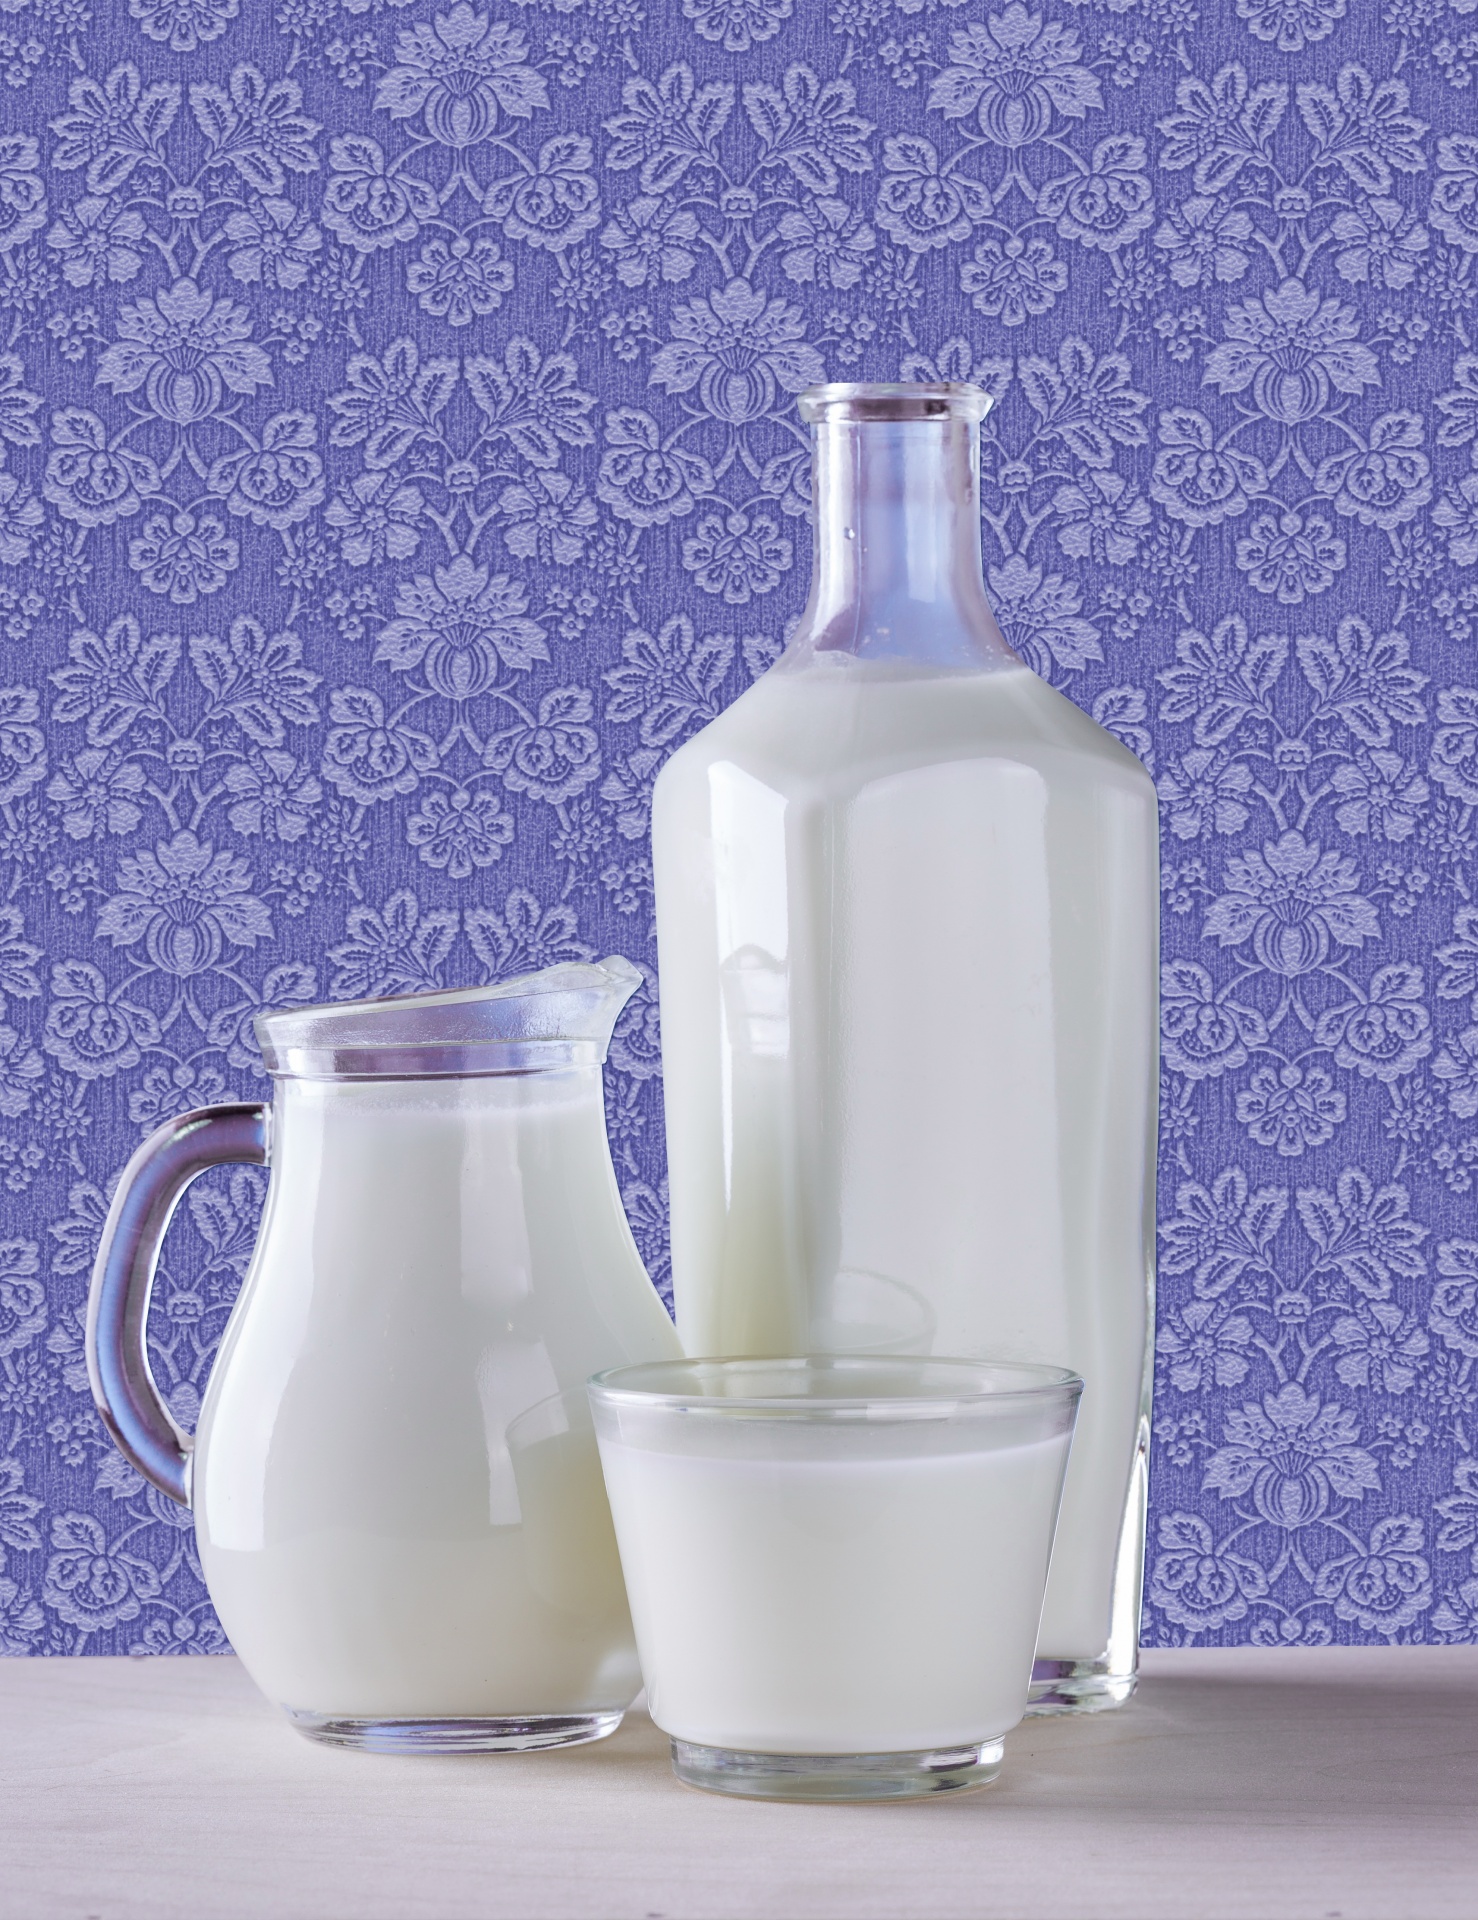 Bottle, pitcher and glass of milk on retro background